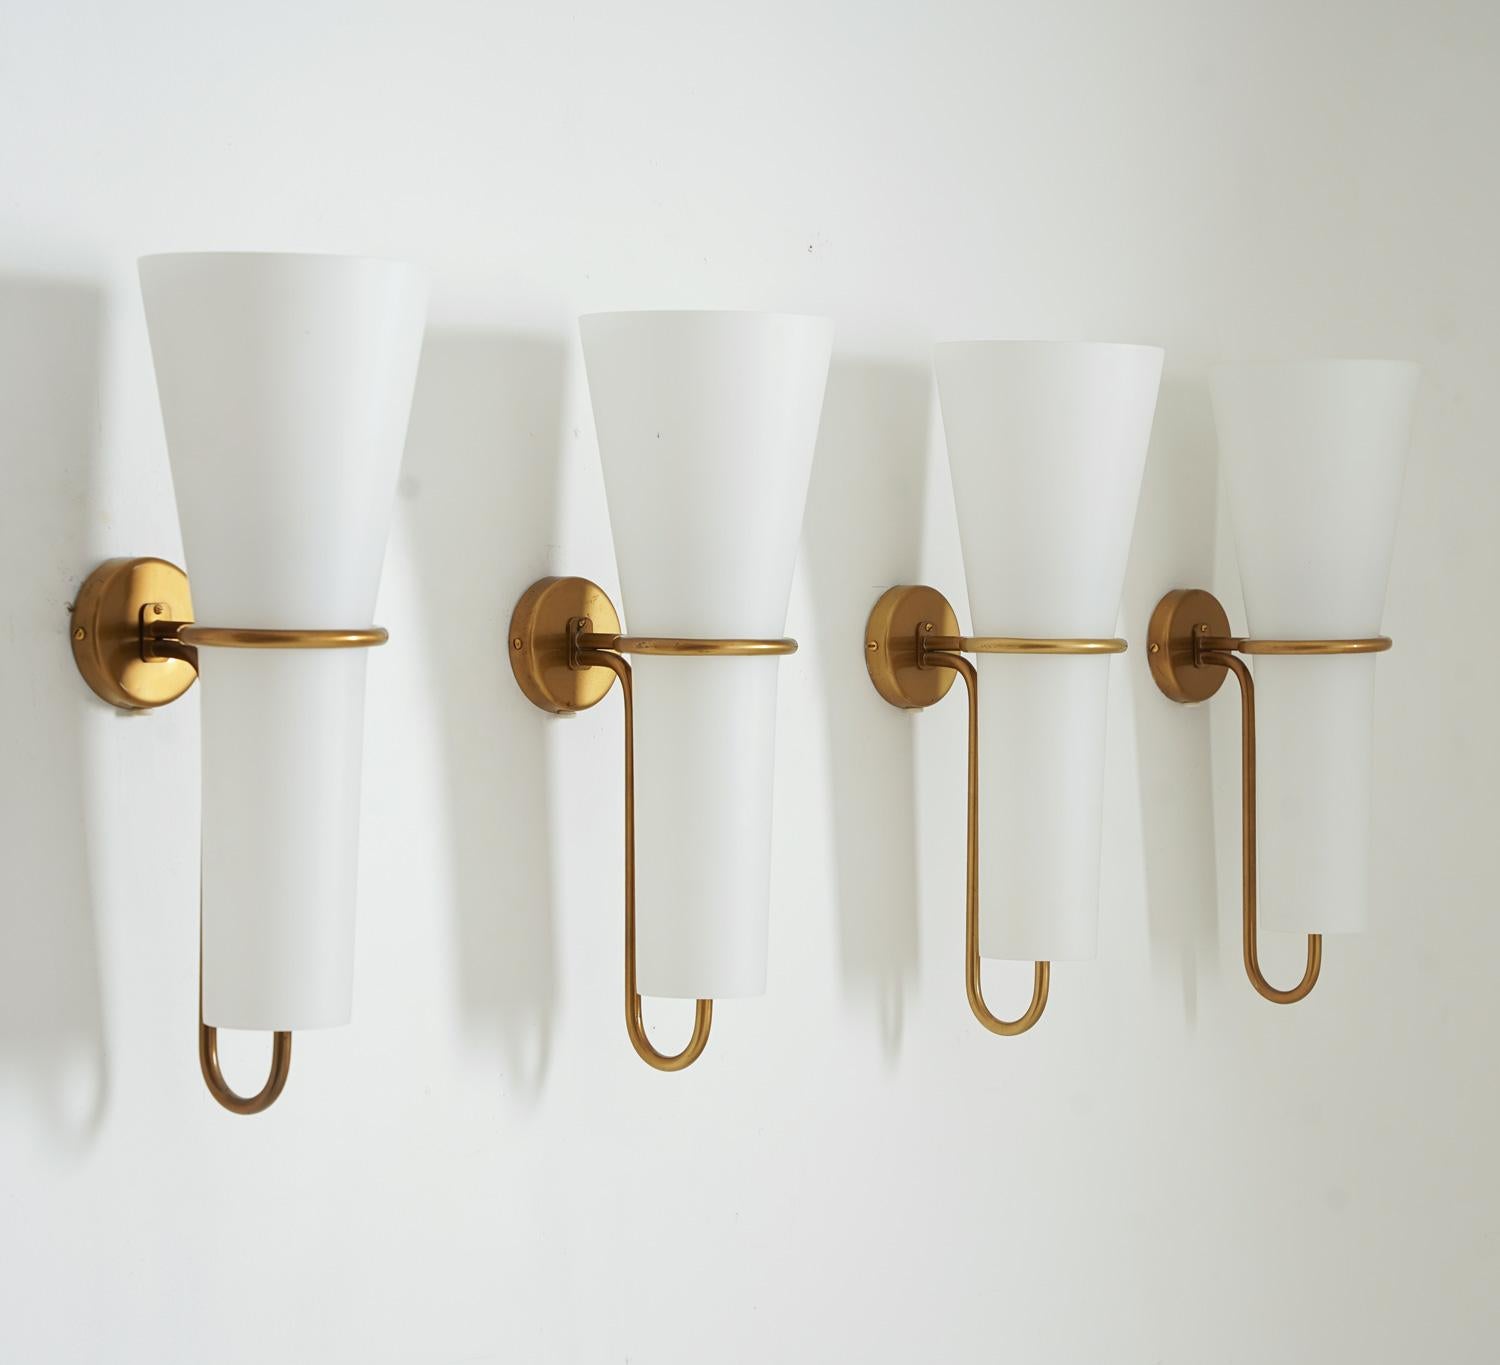 Rare wall sconces by Hans-Agne Jakobsson for Arnold Wiig Fabrikker, Norway. 
These lamps features one light source, hidden by a large opaline glass shade. The shade is held by a brass frame.
Condition: Very good original condition